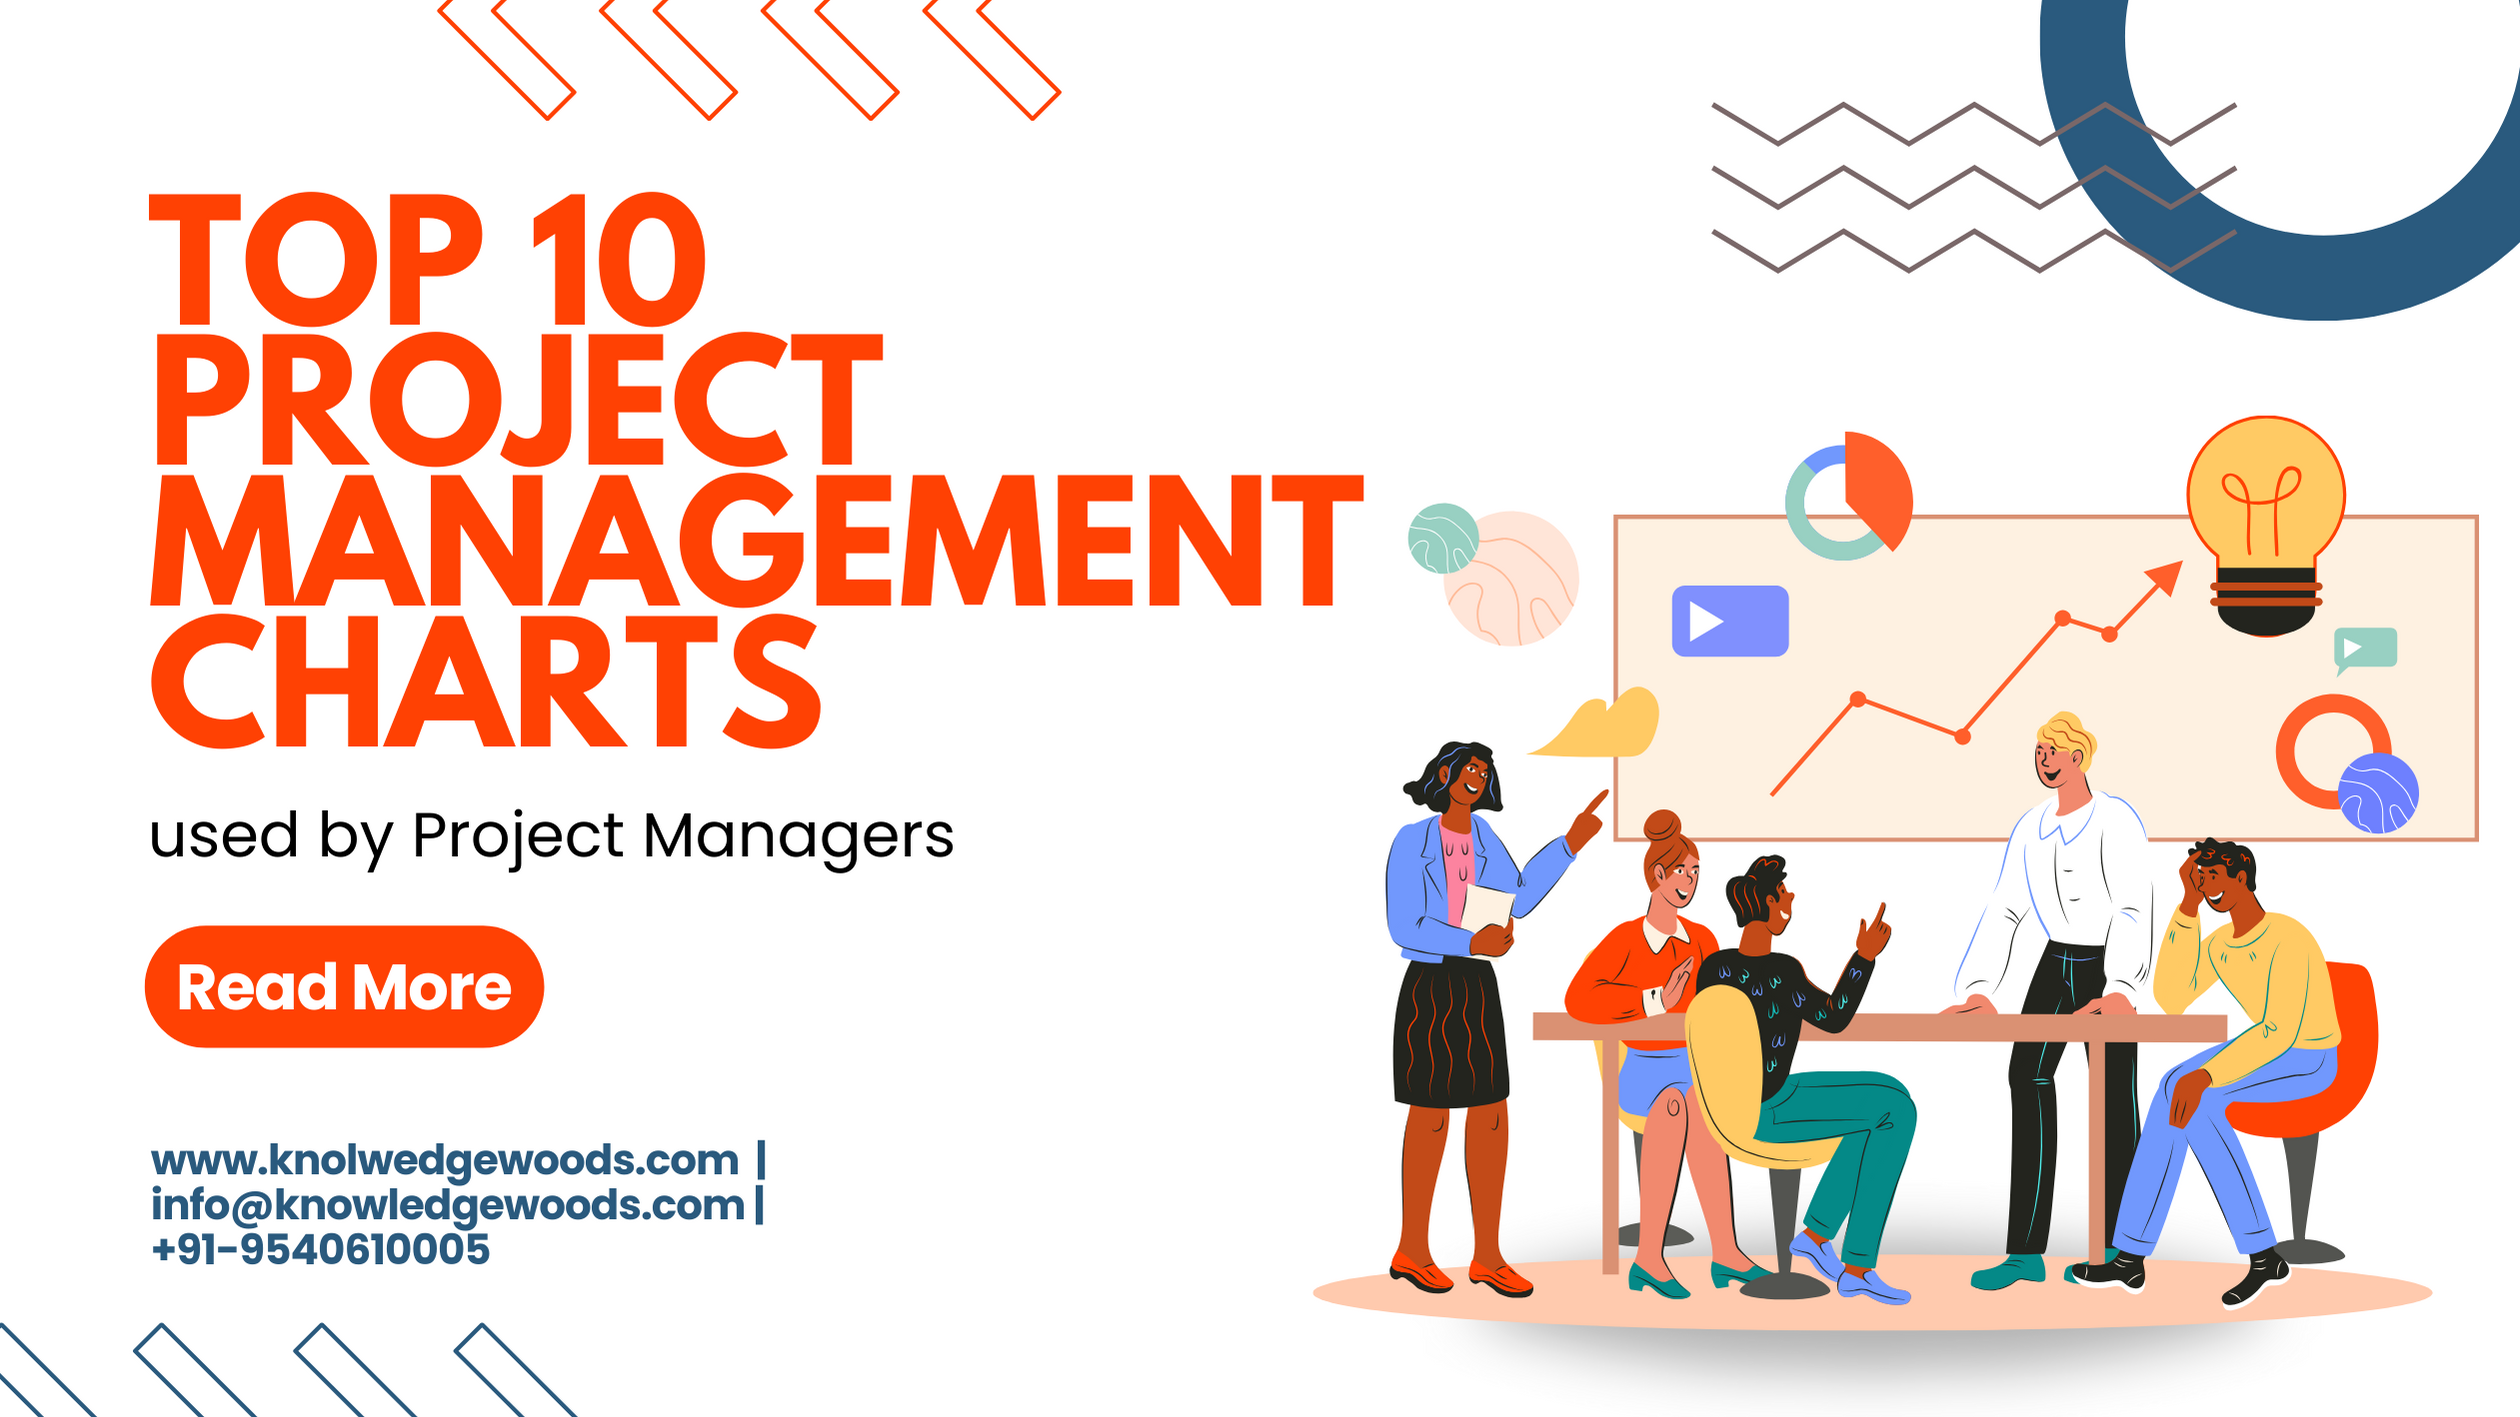 Top 10 Project Management Charts used by Project Managers